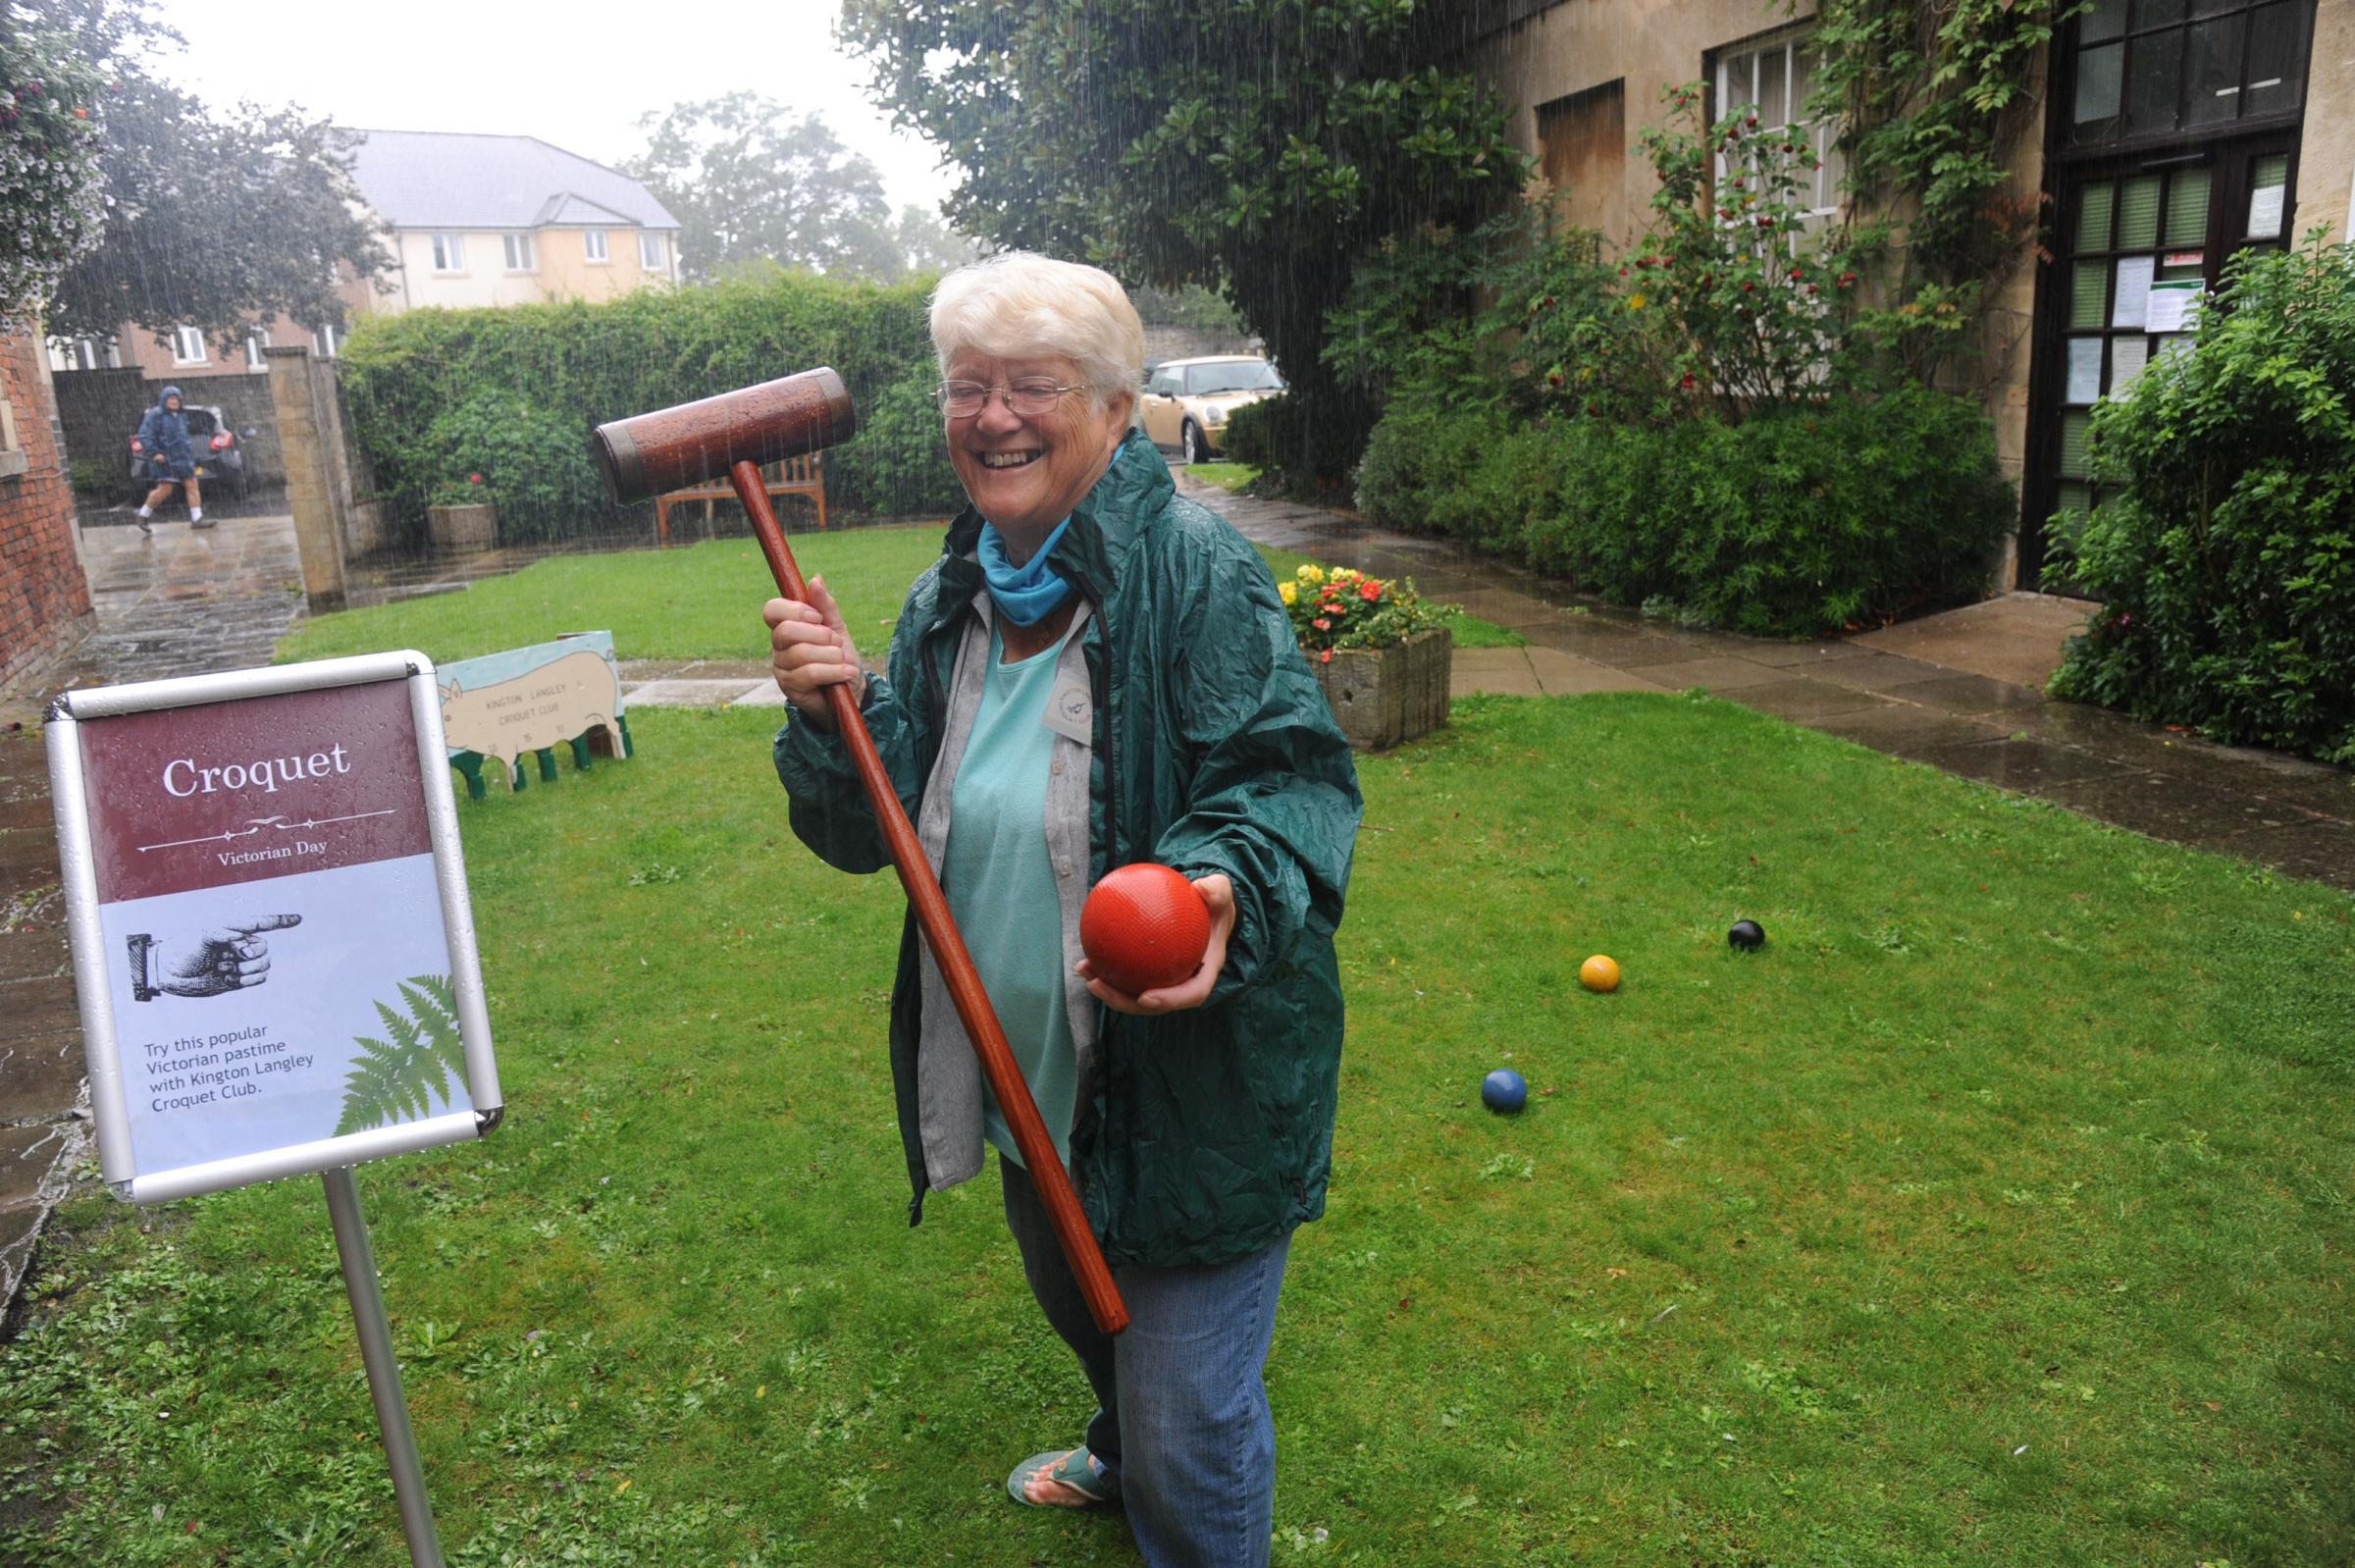 Victorian Day Chippenham Museum Julia Cook explains the rules of Croquet at Chippenham Victorian Day Photo Trevor Porter 67579 5